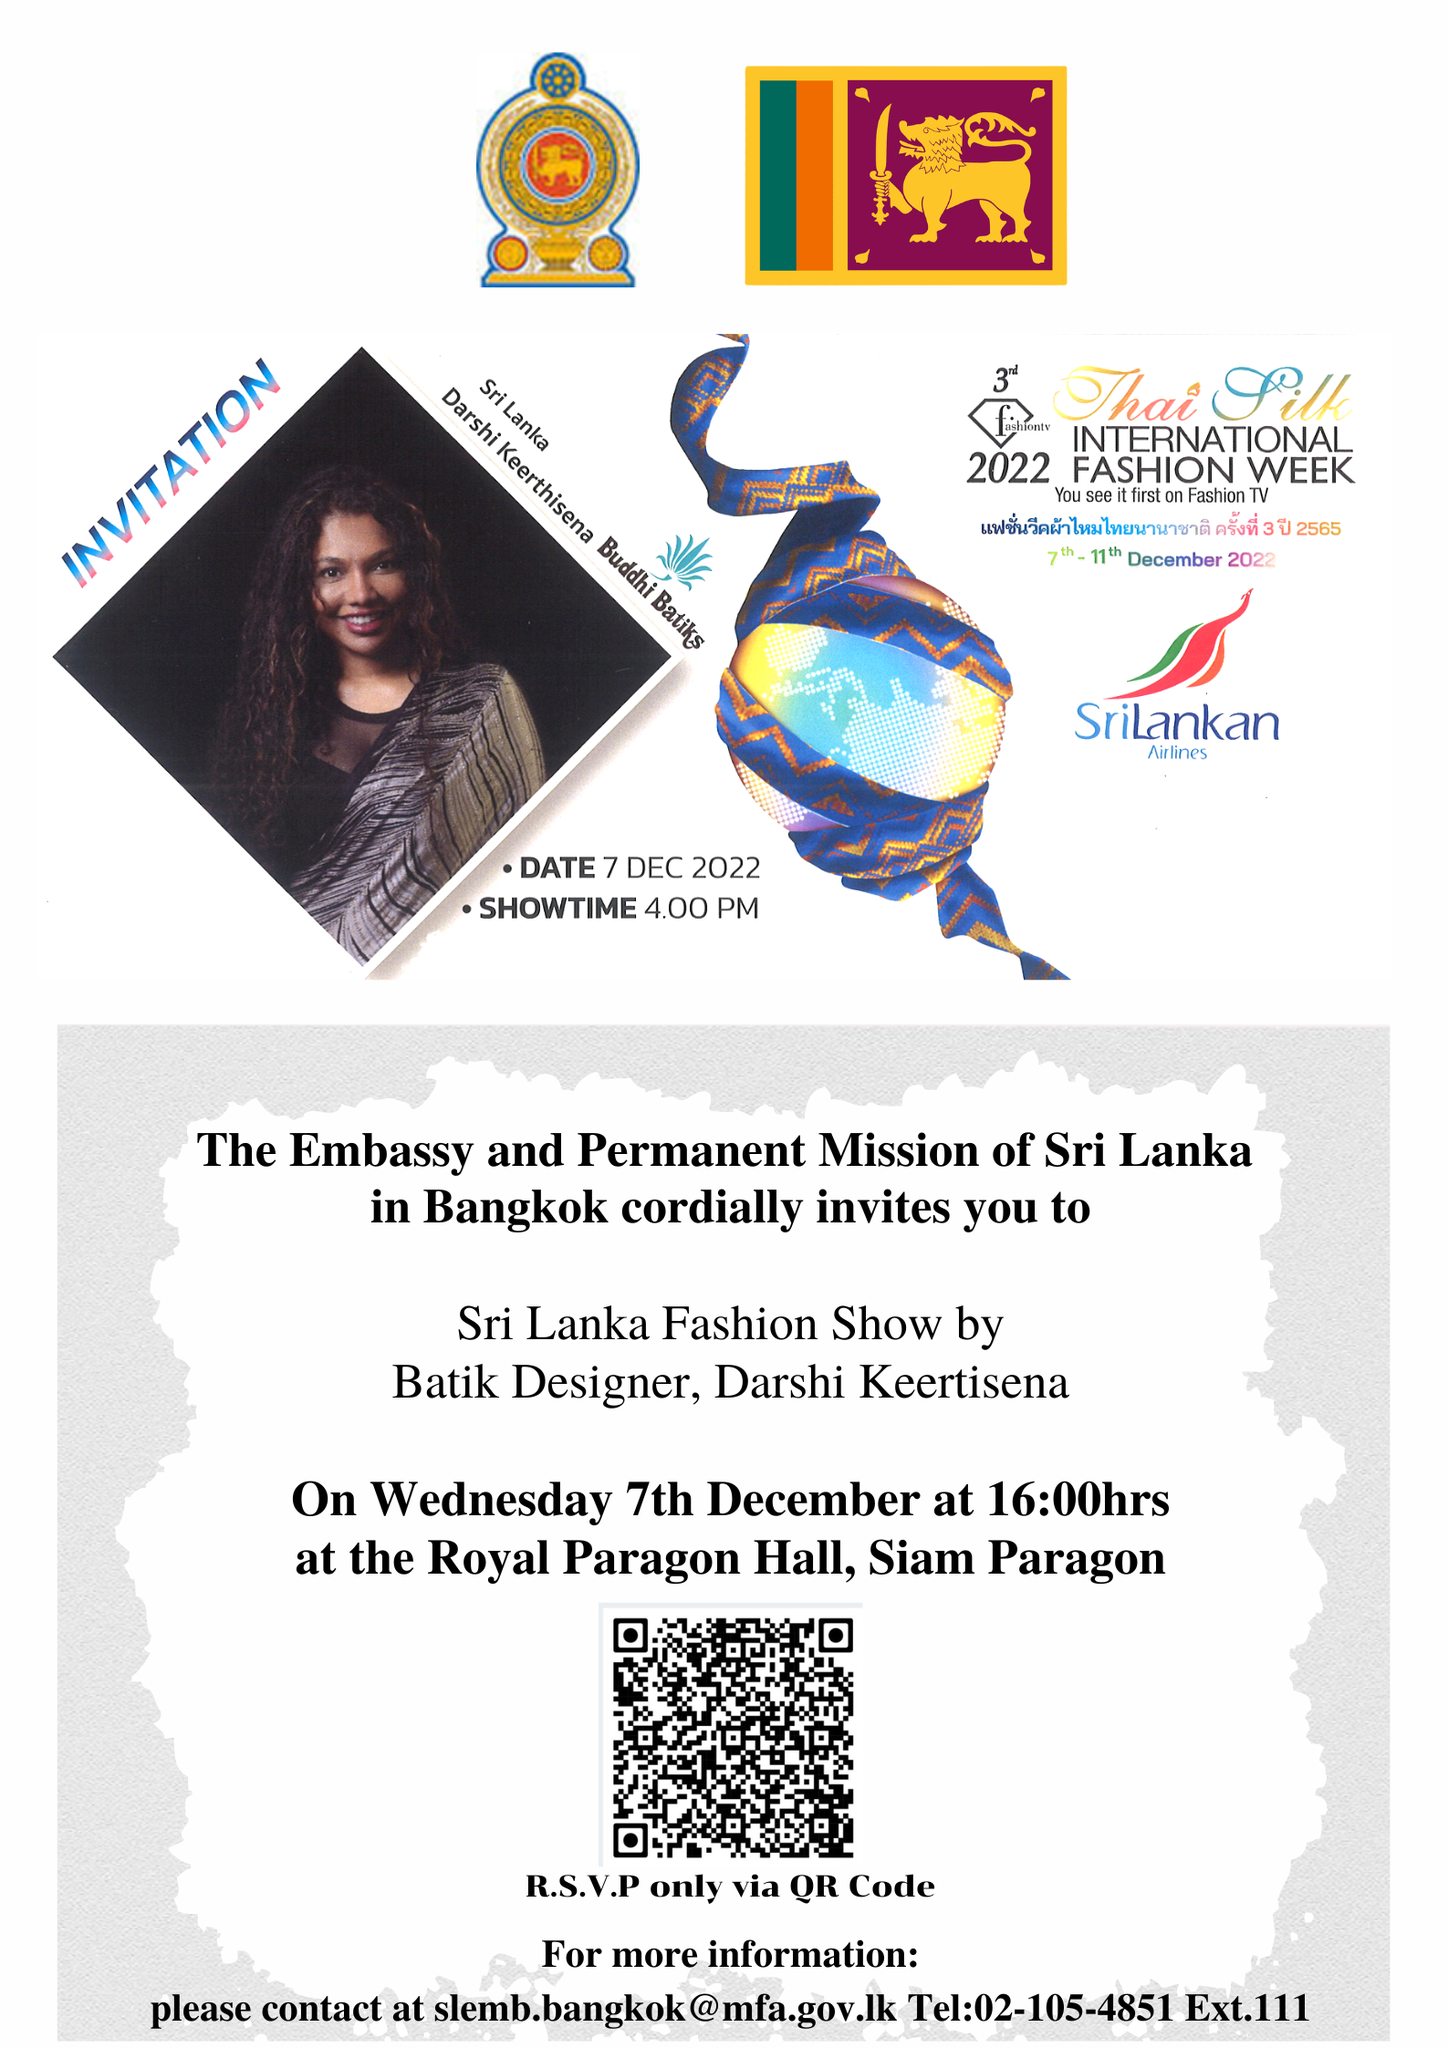 The Embassy and Permanent Mission of Sri Lanka in Bangkok cordially invites you to Sri Lanka Fashion Show by Batik Designer, Darshi Keertisena on Wednesday, 7th December 2022 at 16:00 hrs.